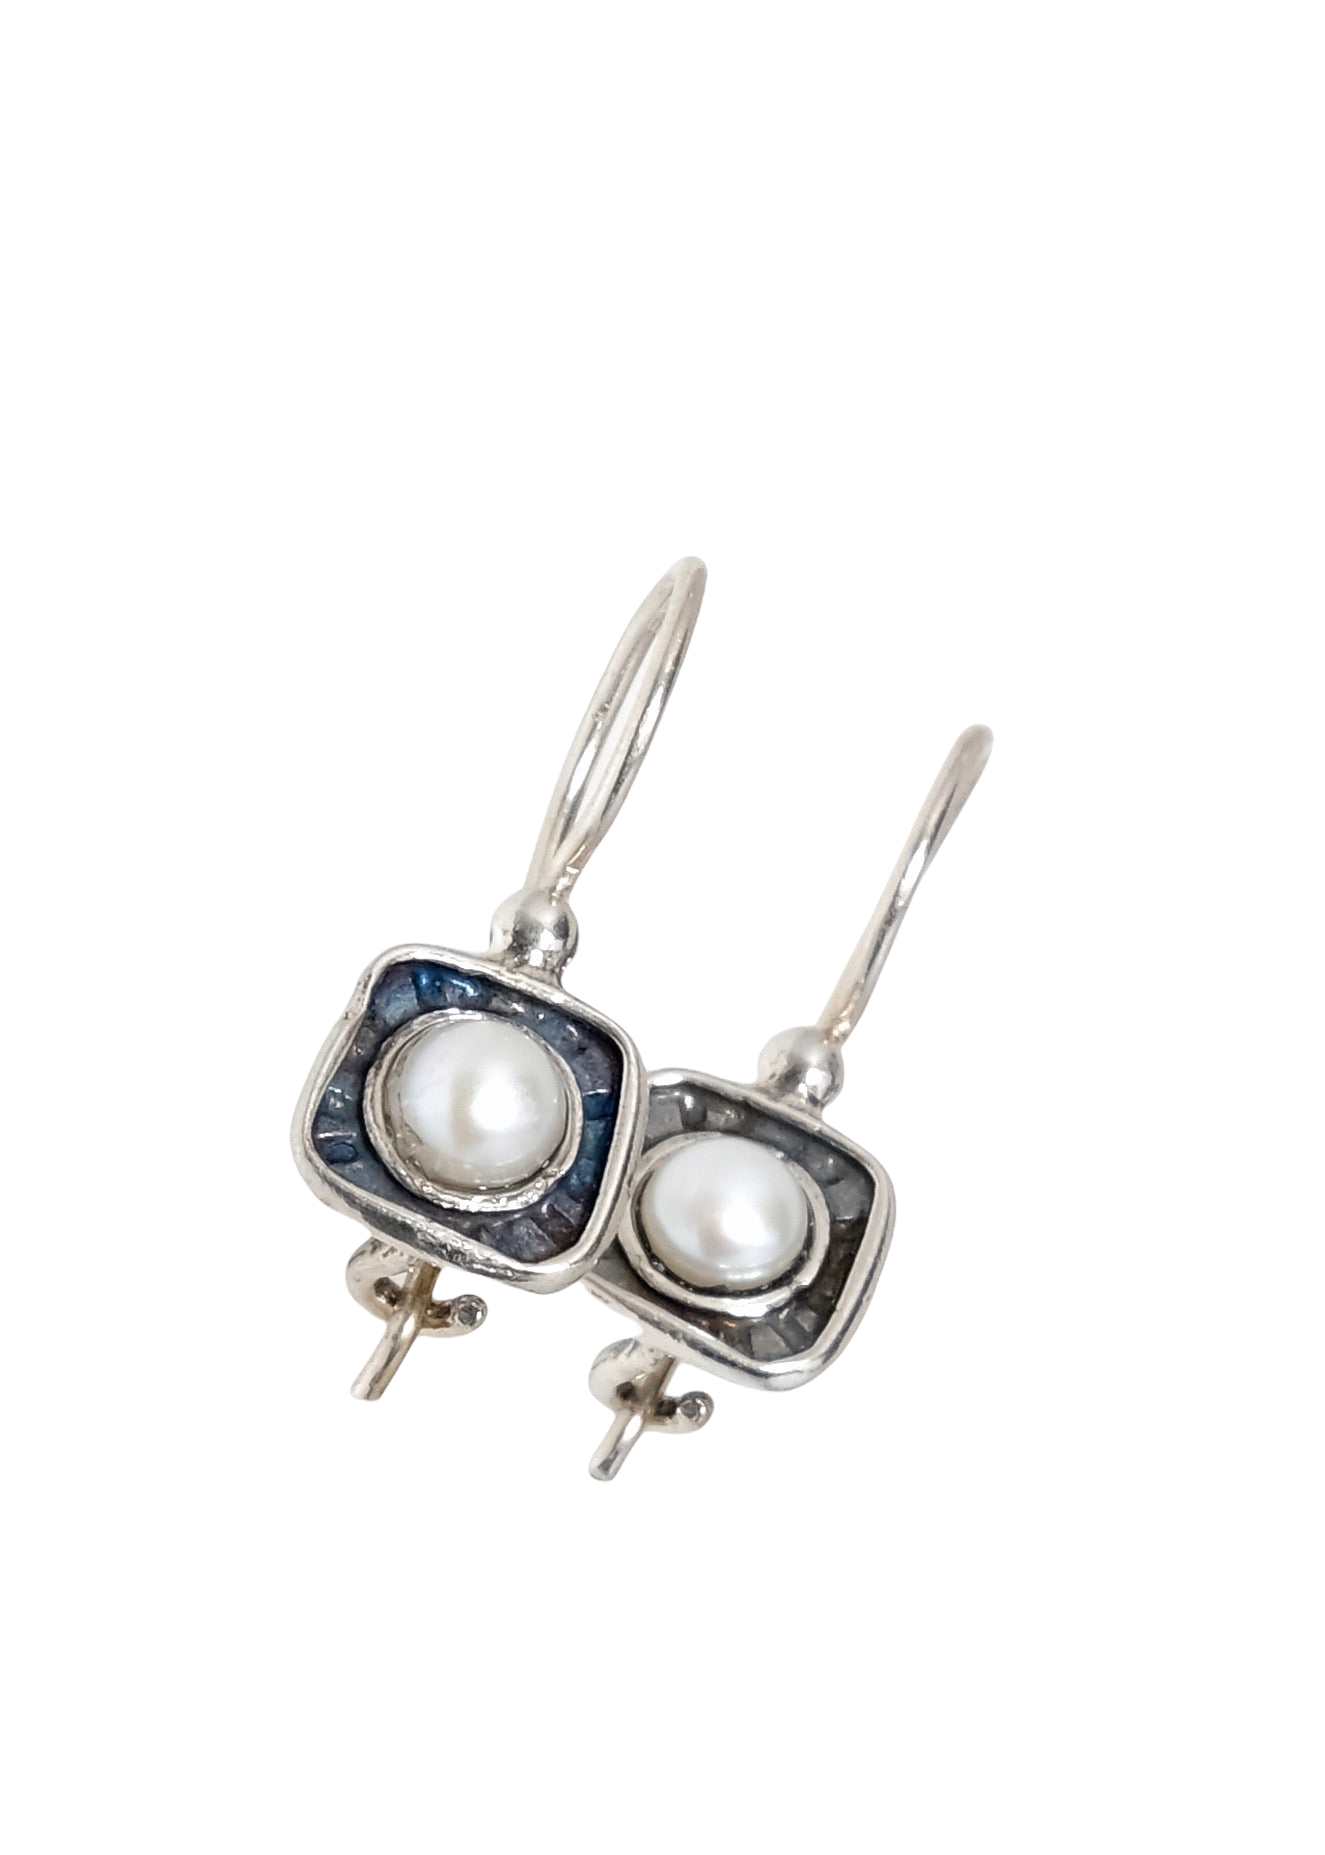 Antique Square Pearl Earrings